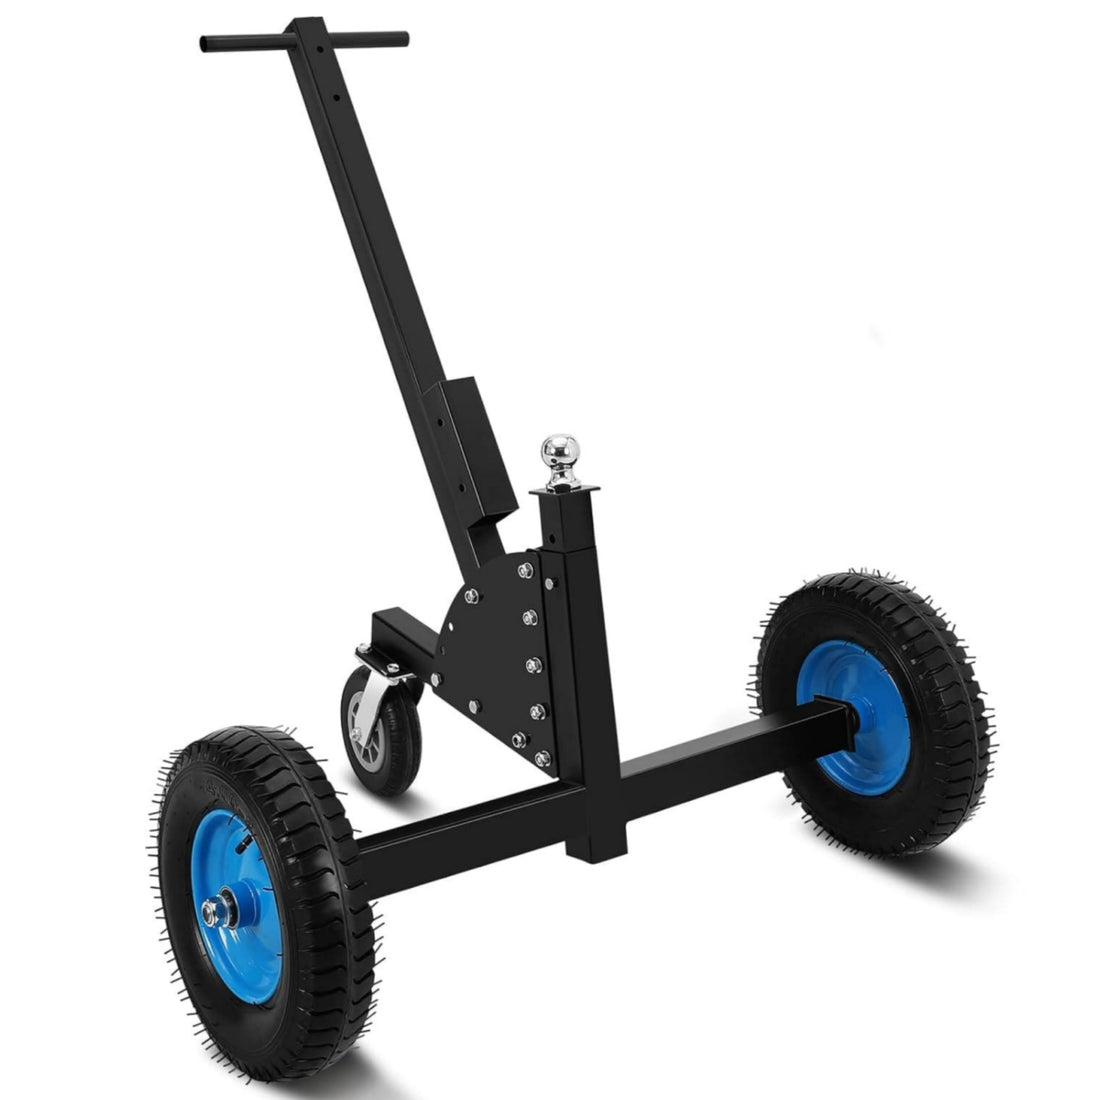 Adjustable Trailer Dolly 1500 lbs Load Capacity, Utility Trailer Mover Dolly with Adjustable Height & 2 Inch Ball,Pneumatic Tires & 3 Universal Wheel, Carbon Steel Trailer, Multiple-uses